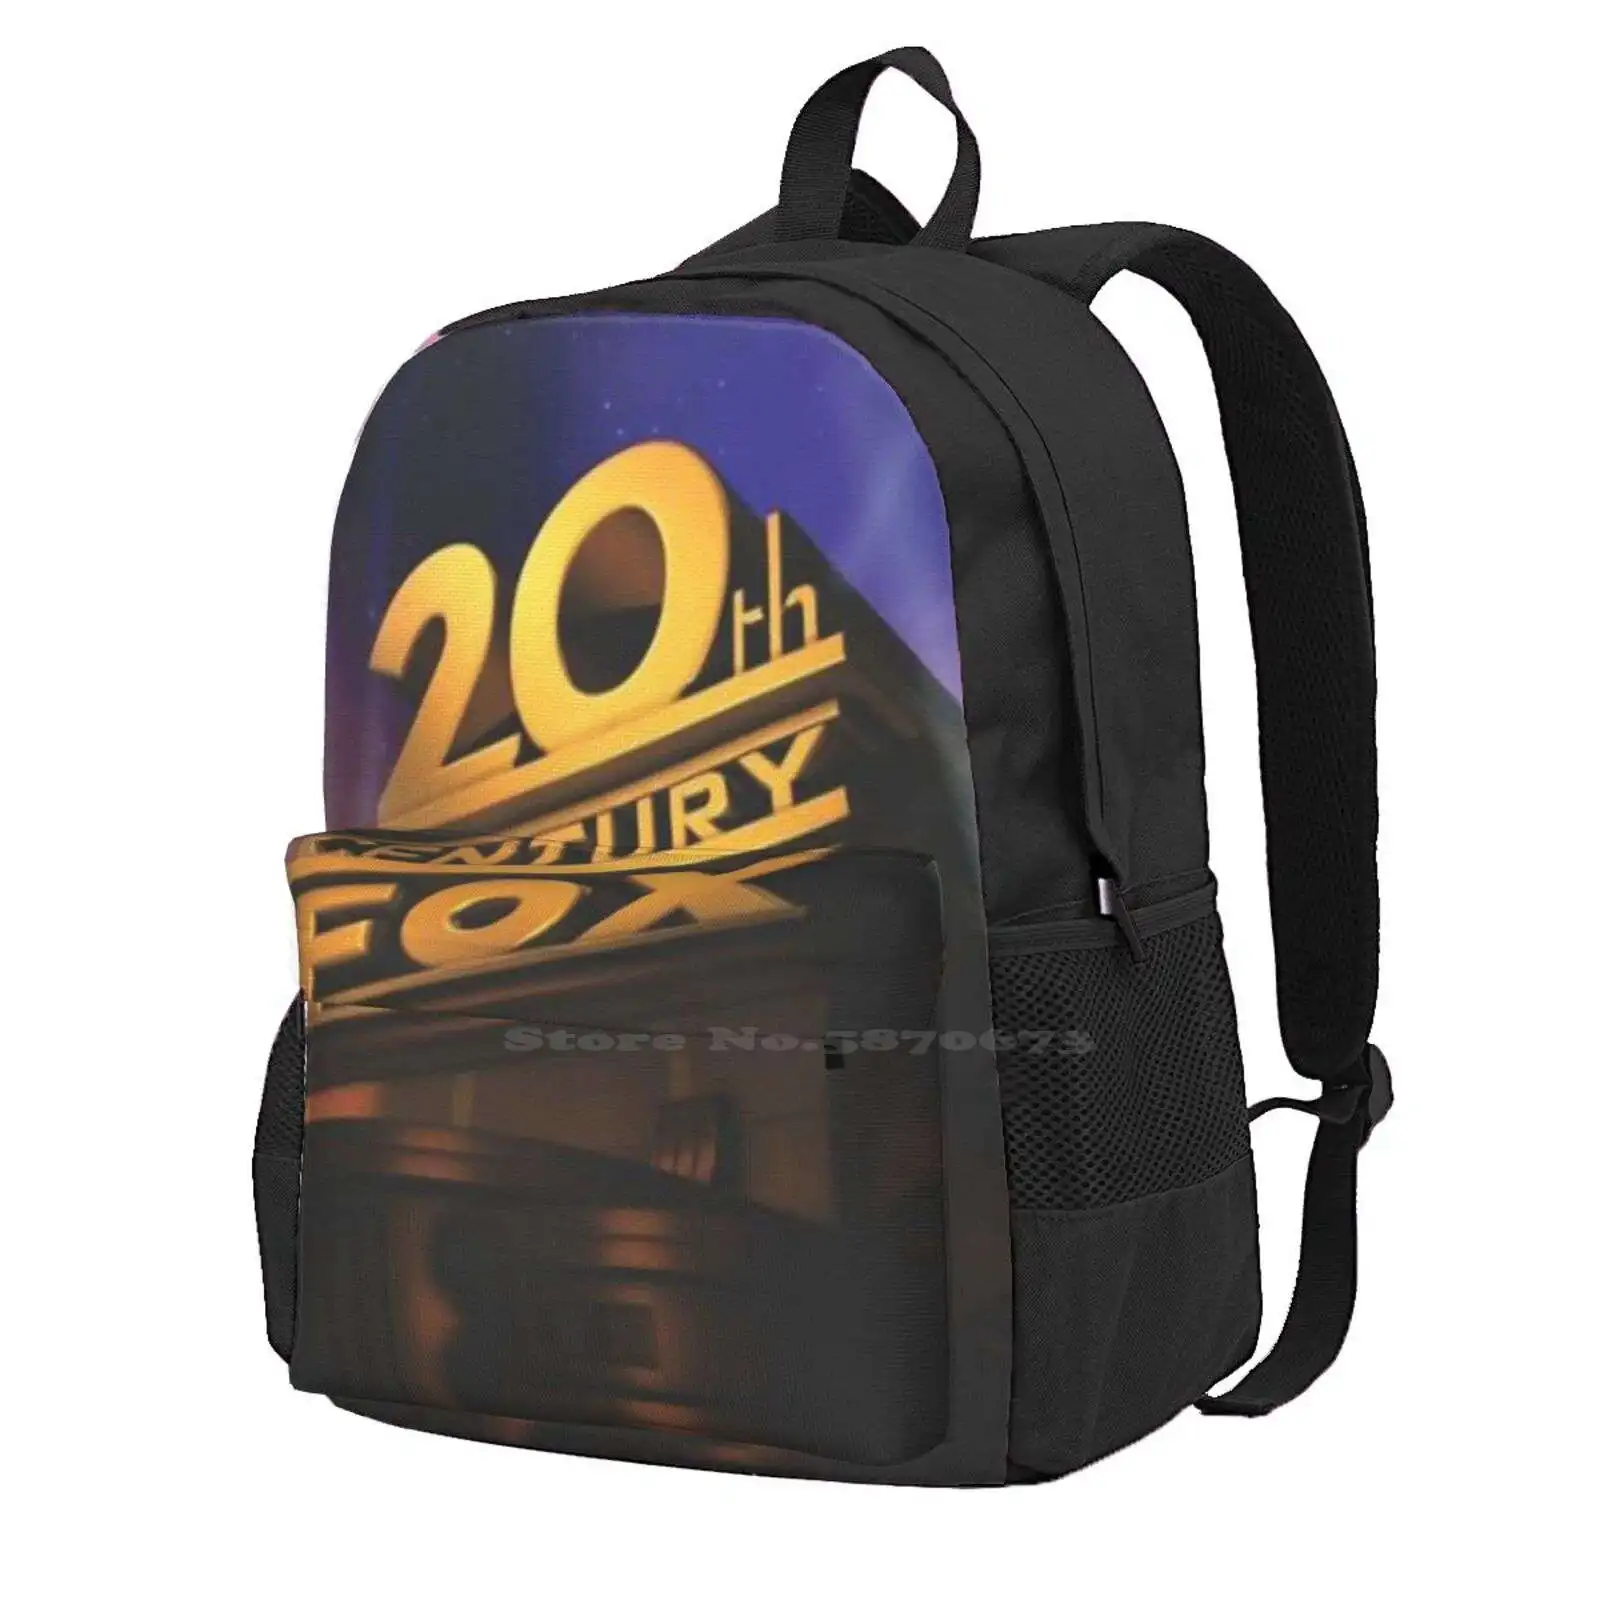 

20 Century Fox Teen College Student Backpack Laptop Travel Bags Universal Pictures 100th Anniversary Paramount Pictures Logo